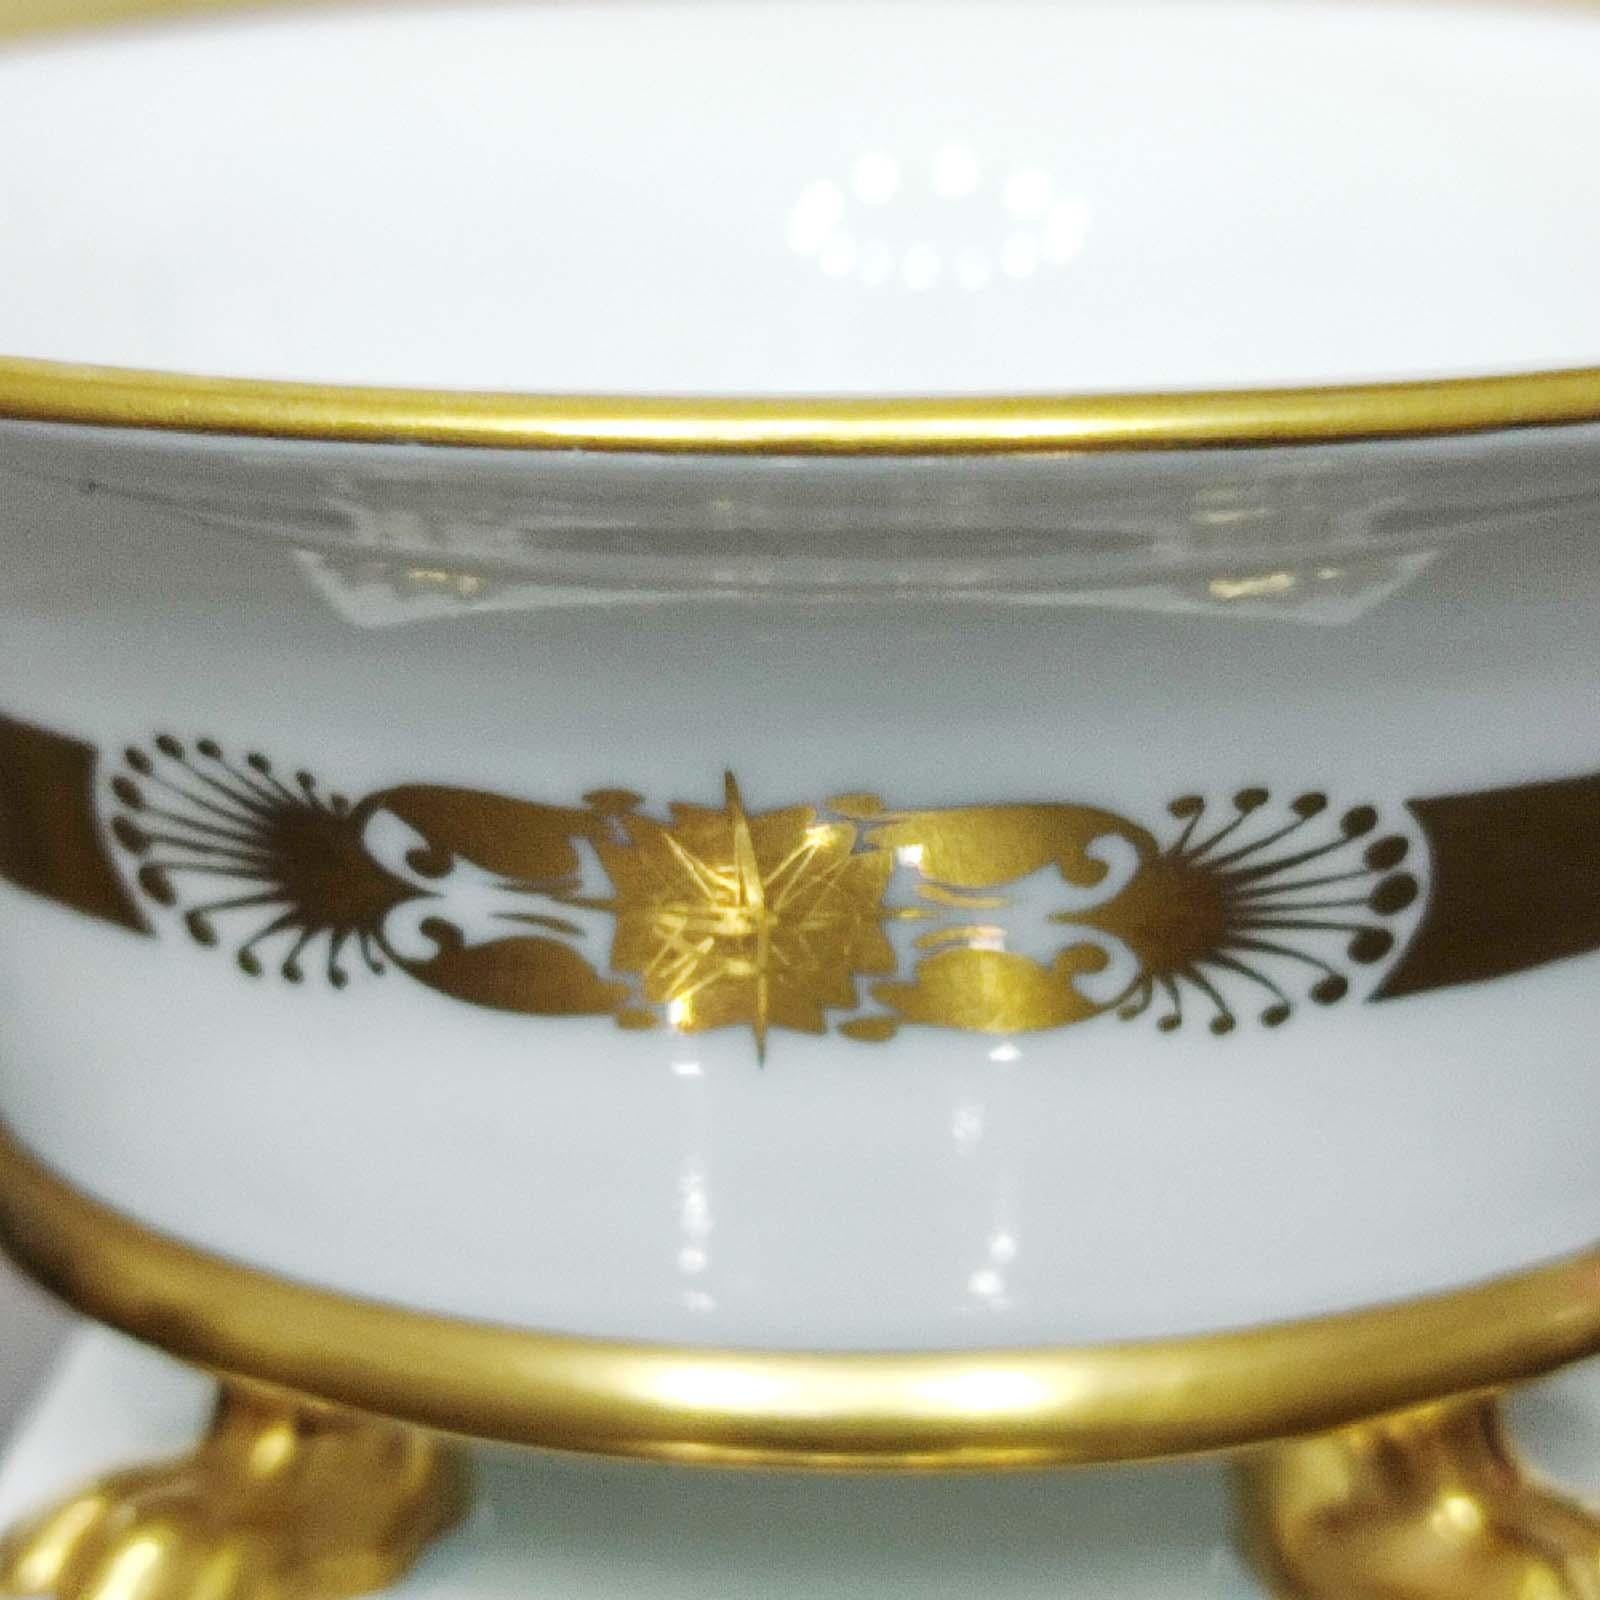 Herend Hungary Porcelain Small Cache Pot Gold Trim, Claw Footed 1